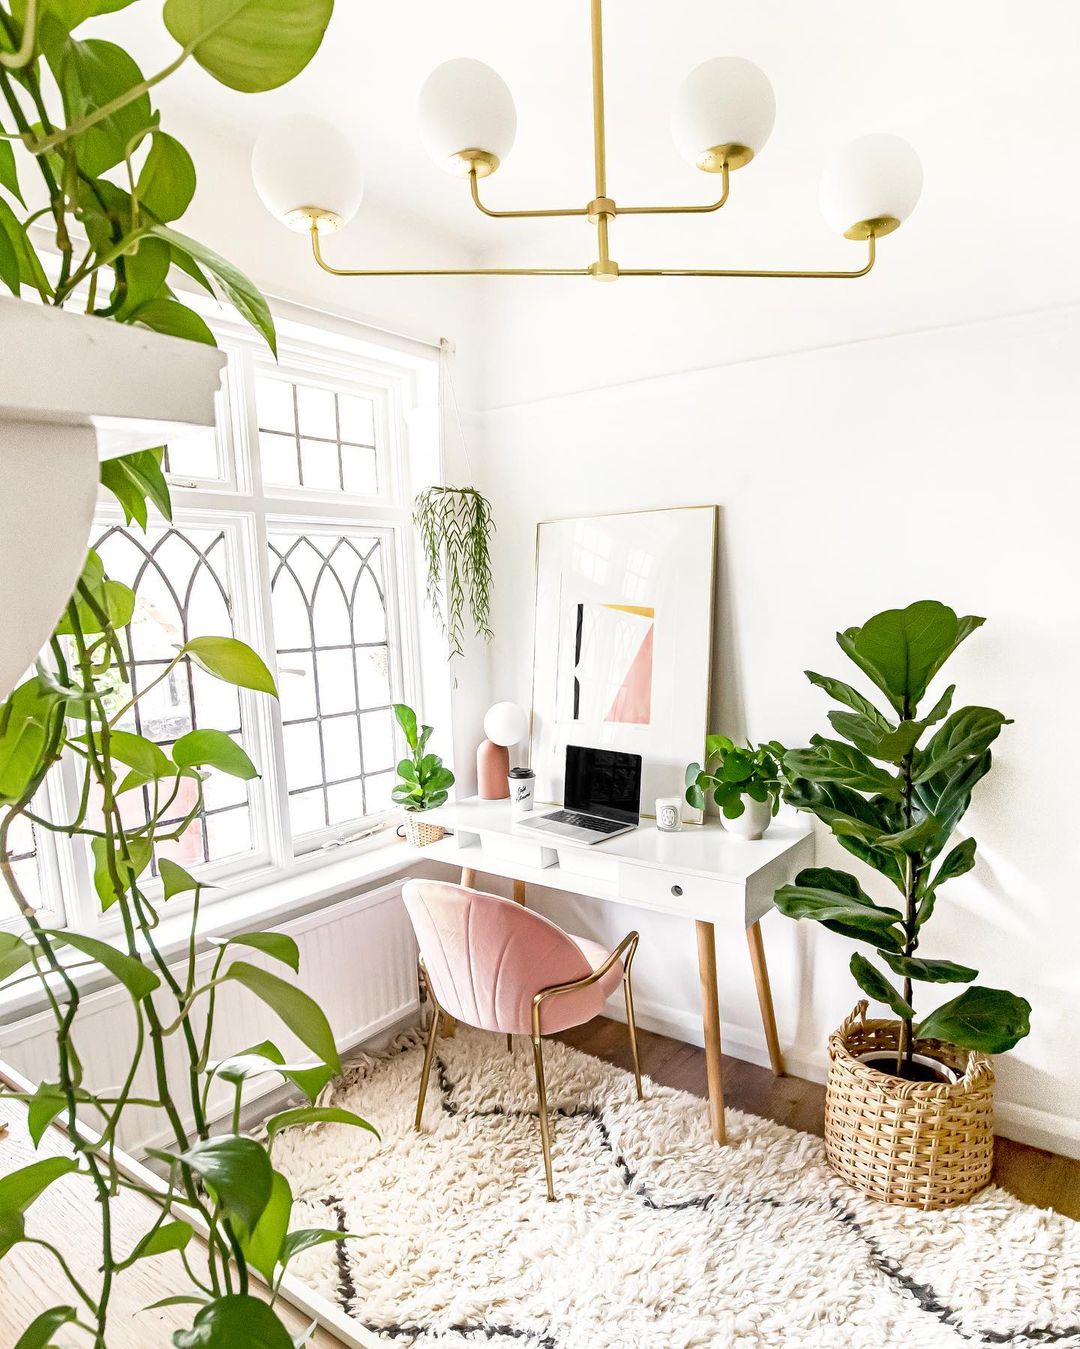 Bright, white room with hanging plants, a large fiddle-leaf fig across from a baby fiddle-leaf fig, and a golden pothos off-frame with the leaves cascading along the side of the photo. Throughout the room, metallic gold accents the light fixture, arms and legs of the desk chair. Photo by Instagram user @homewithkelsey.